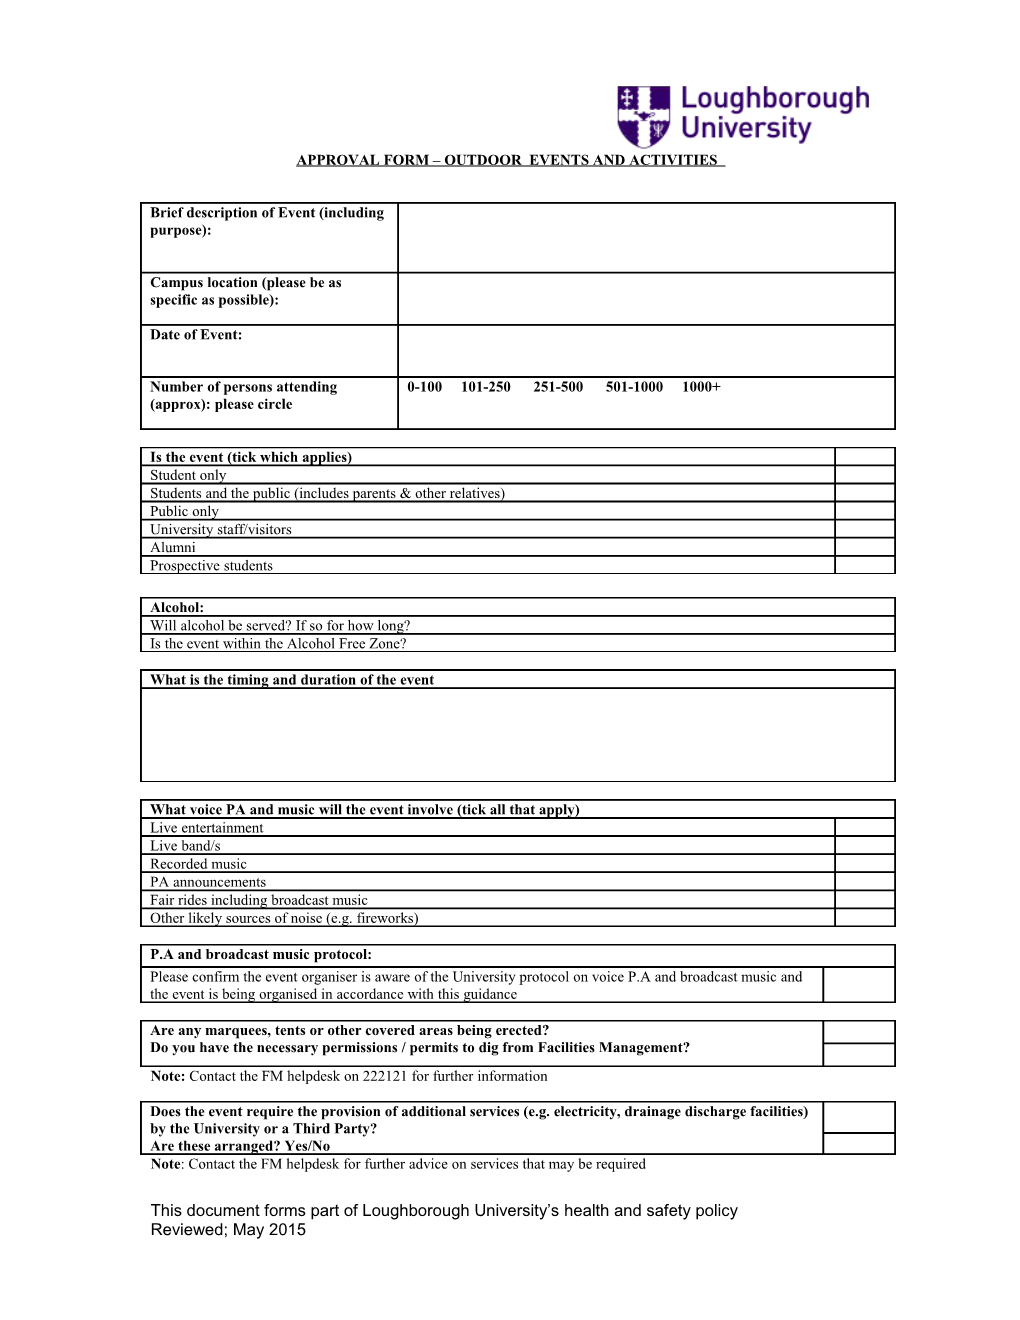 Approval Form Outdoor Events and Activities